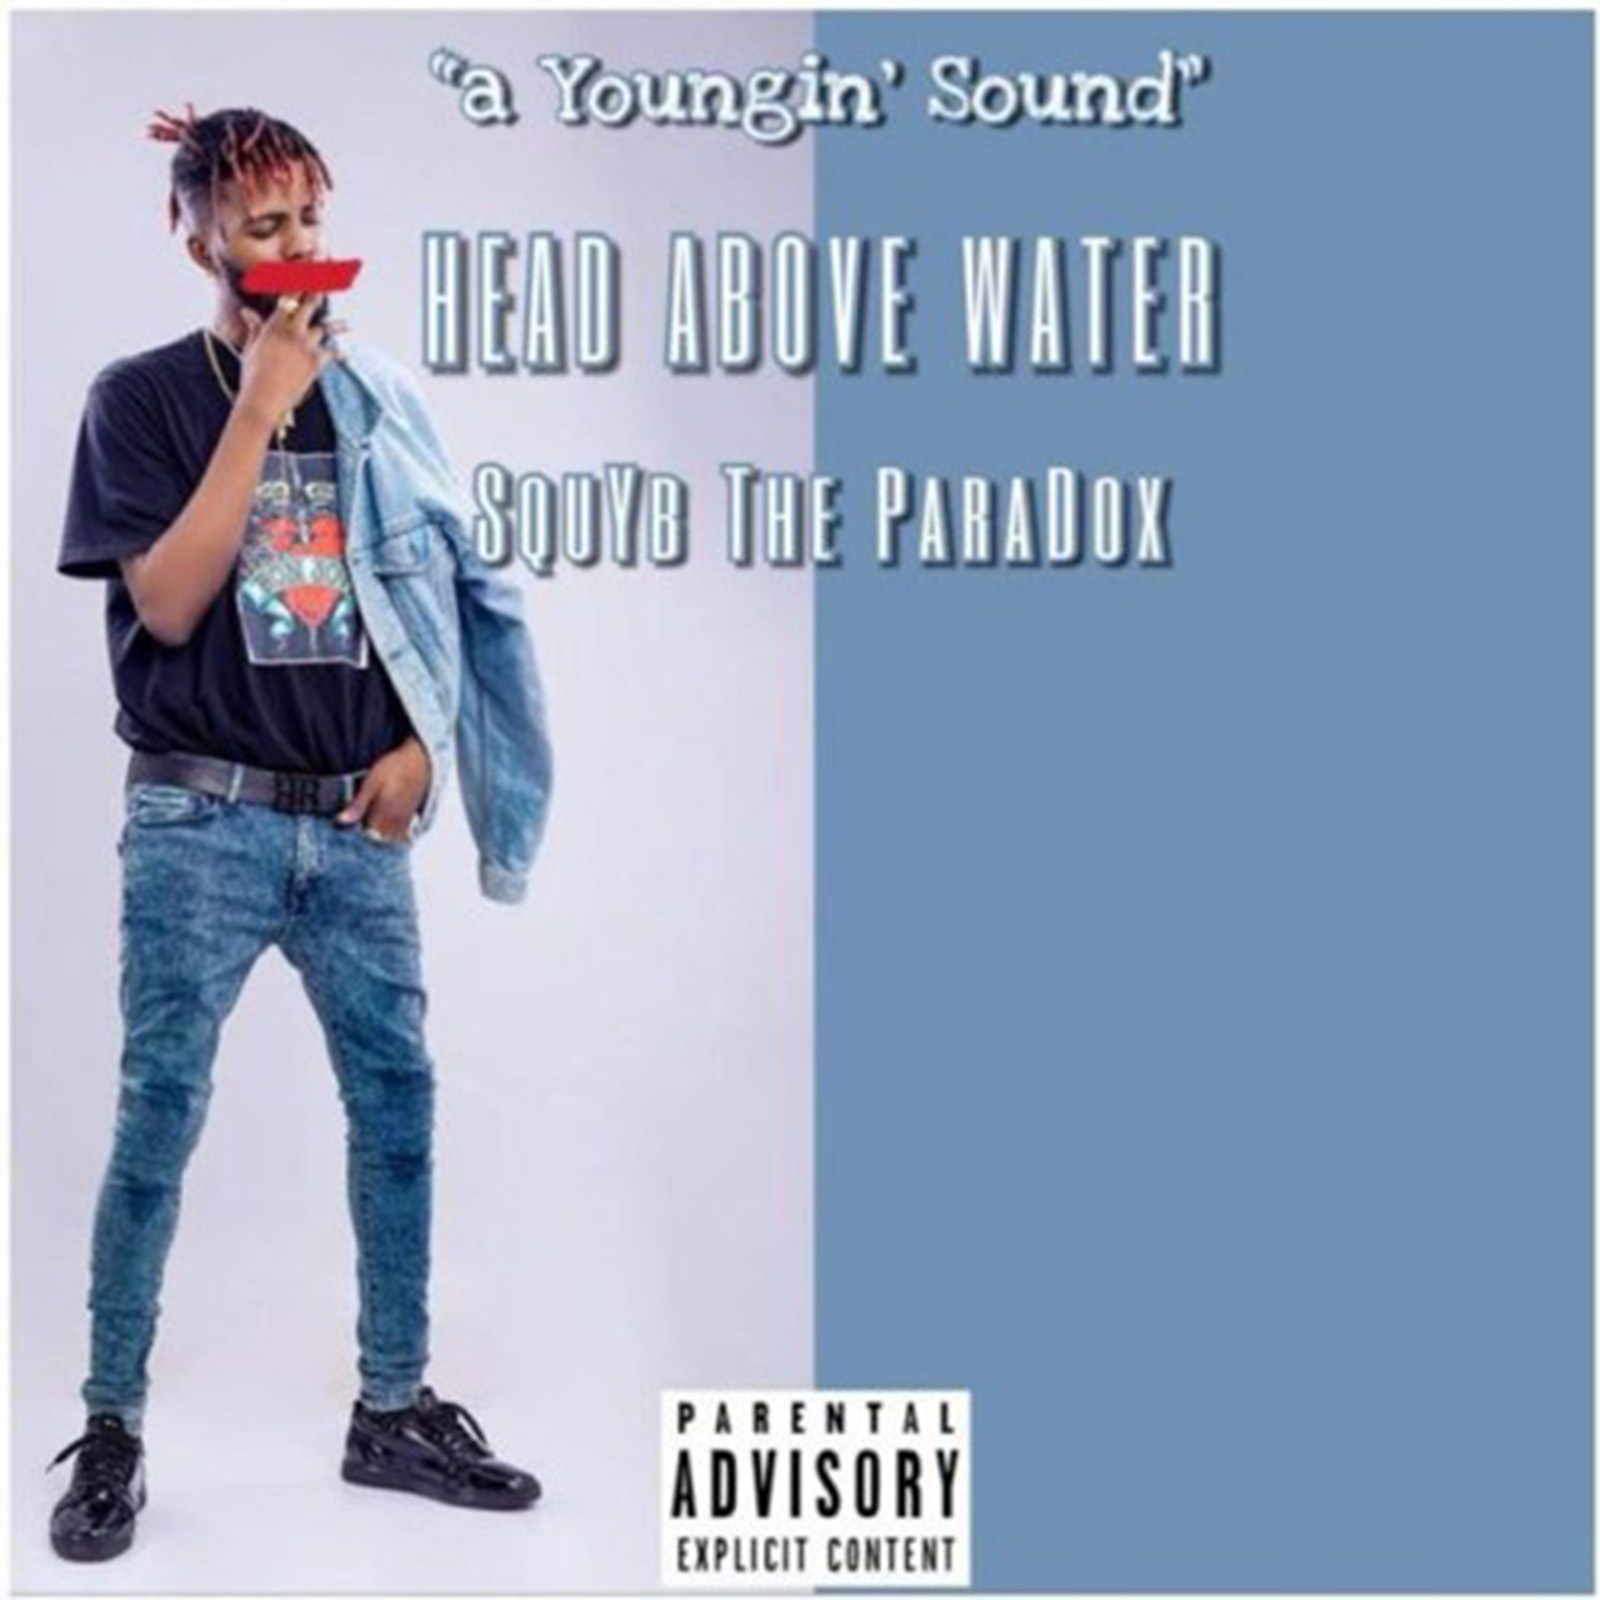 Head Above Water Album by SquYb